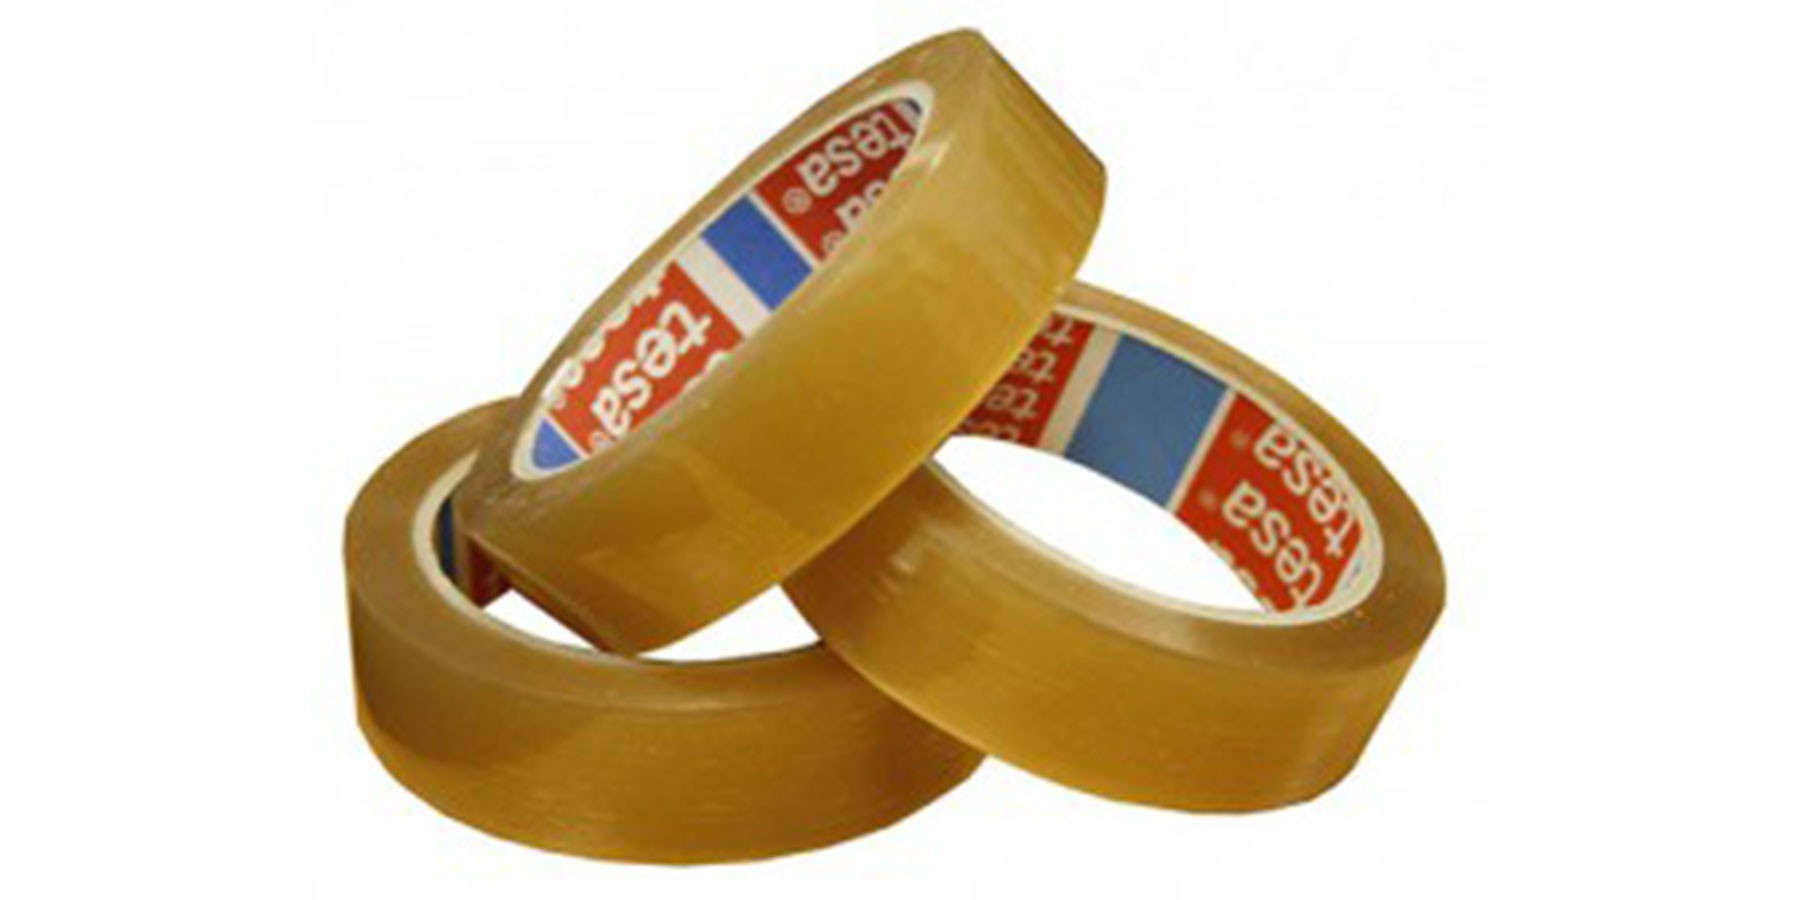 Cello Tape - Hillside Paper Products